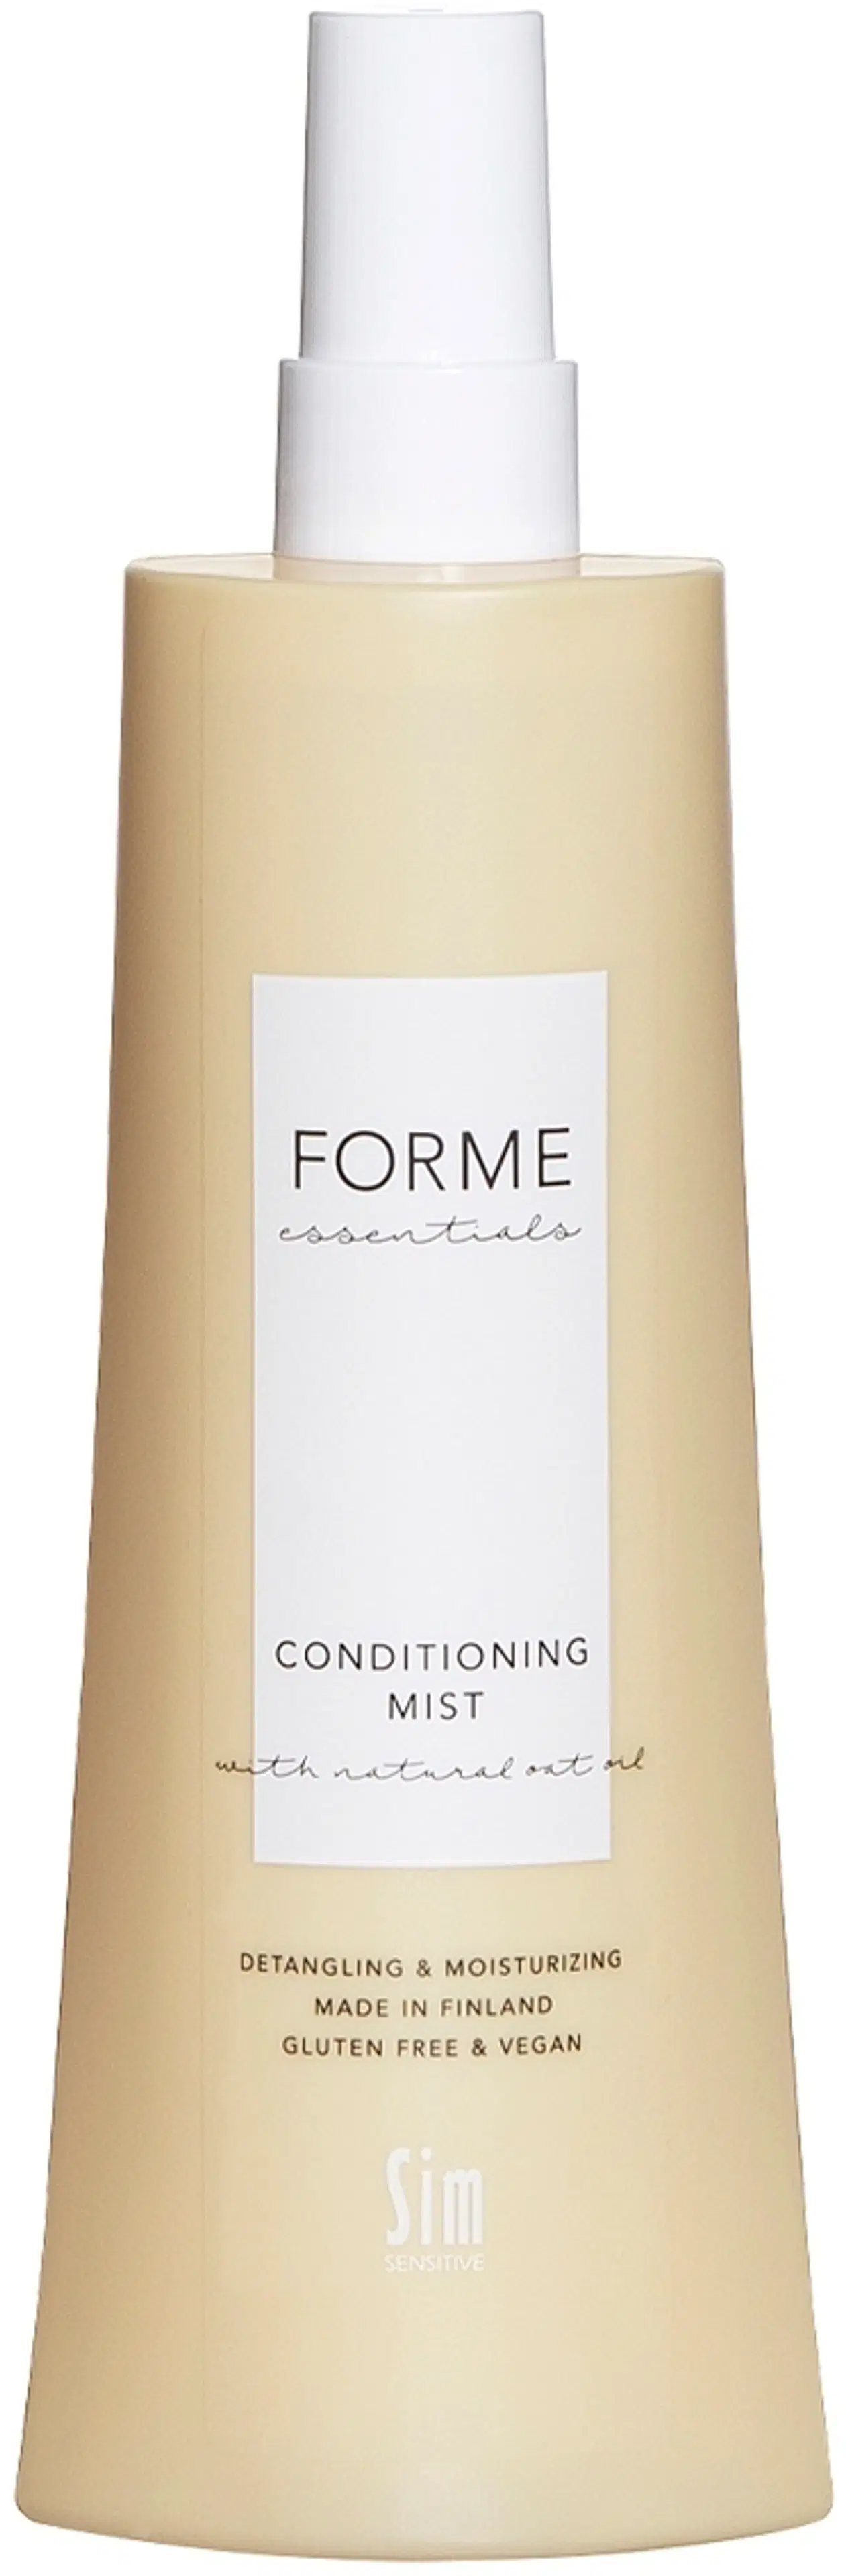 Forme Conditioning Mist 250 ml